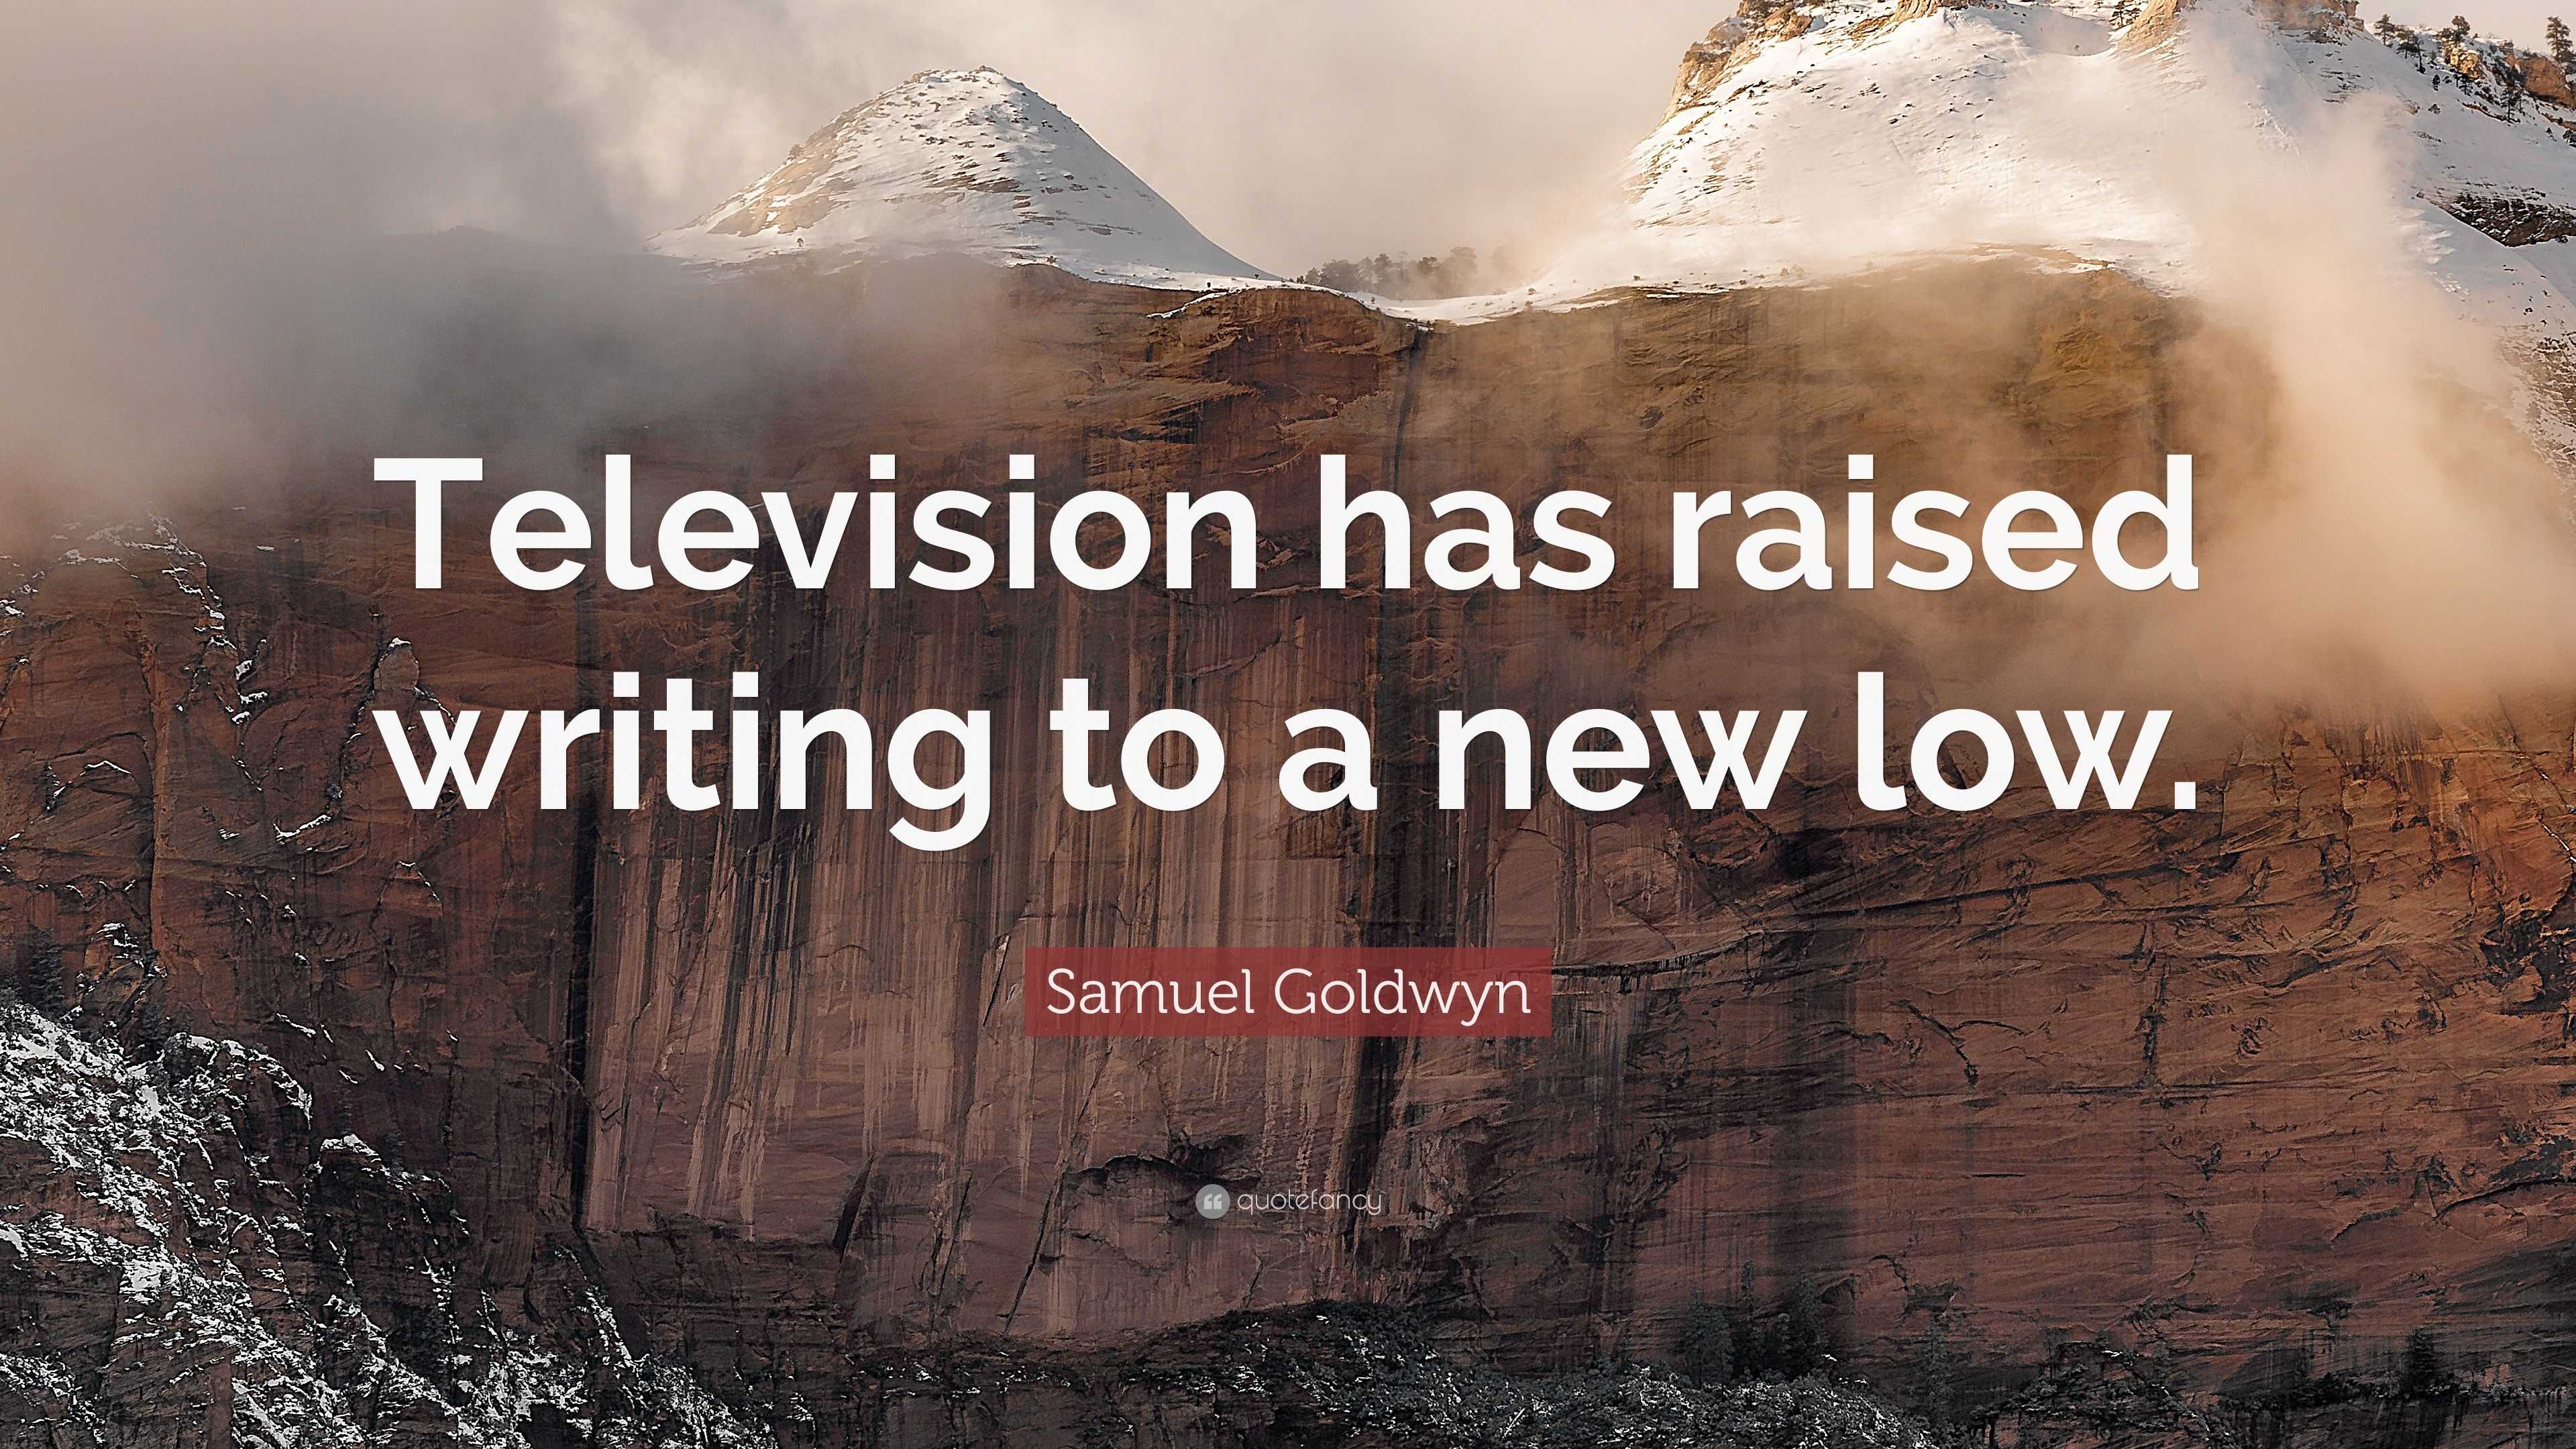 quotations about television essay